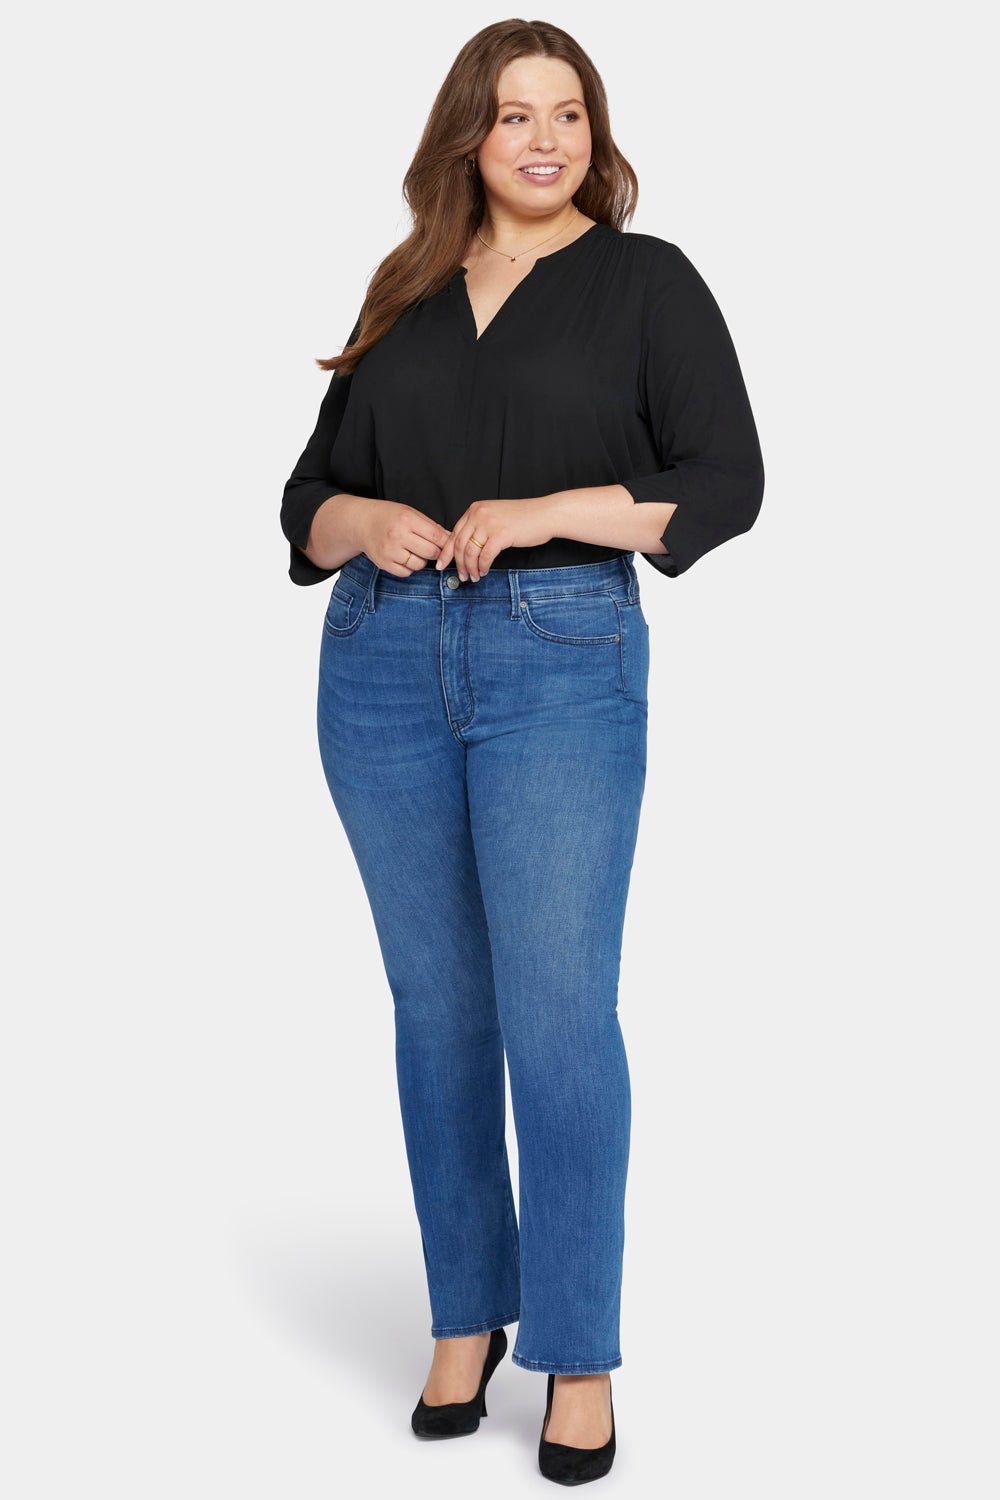 Le Silhouette Slim Bootcut Jeans In Long Inseam Plus Size With High Rise -  Amour Blue